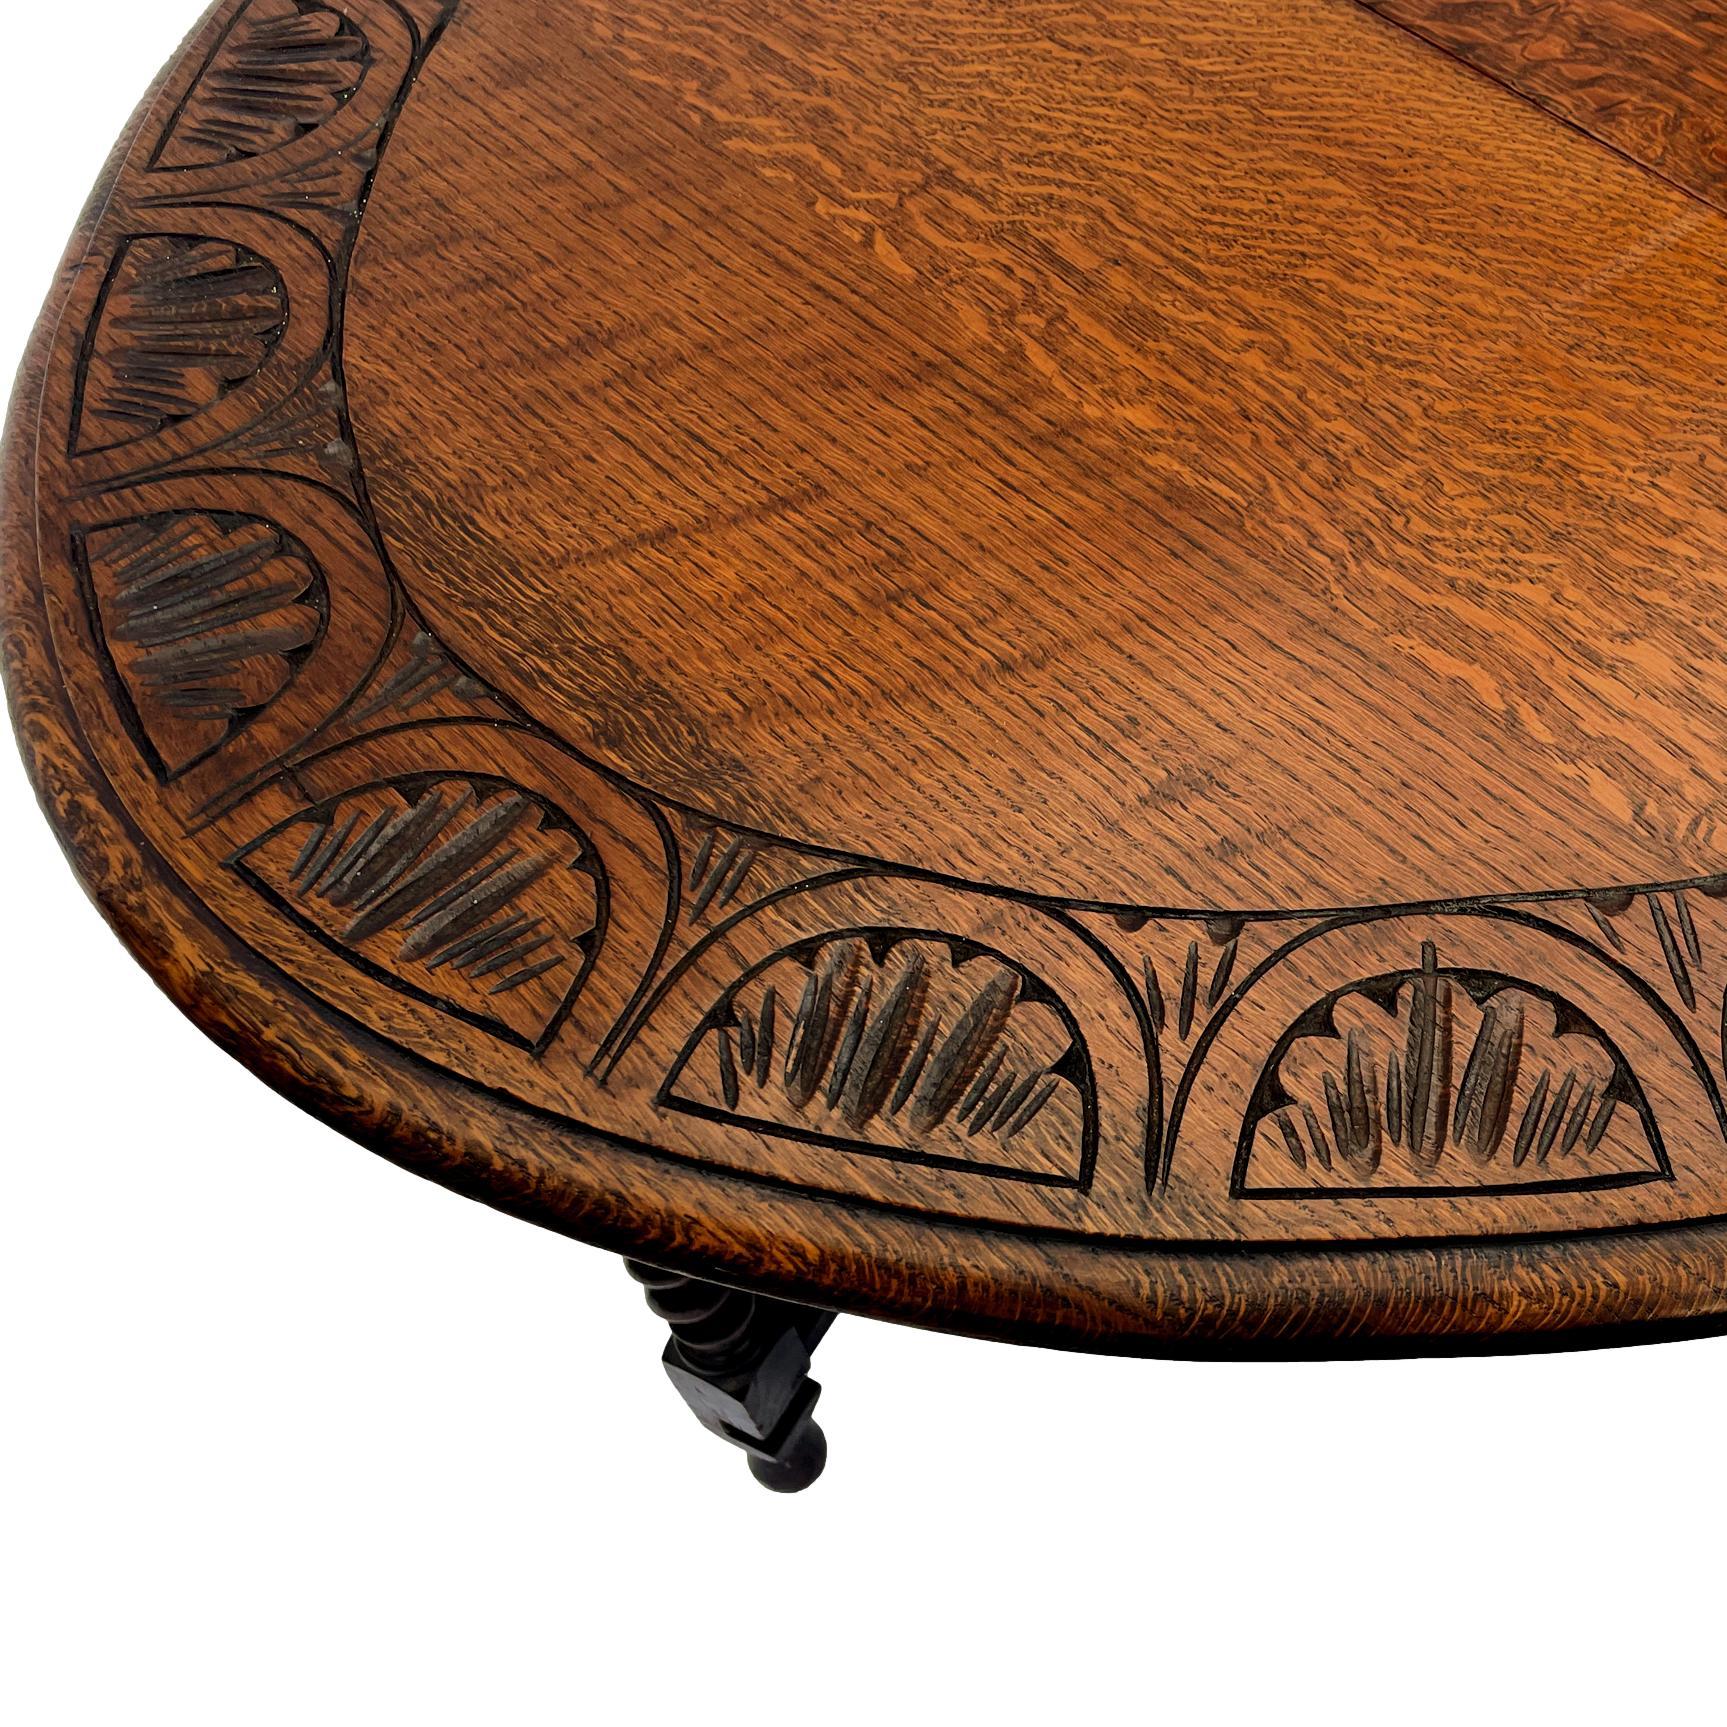 Oak Barley Twist Drop-Leaf Table with a Carved Top, English, circa 1920 For Sale 1